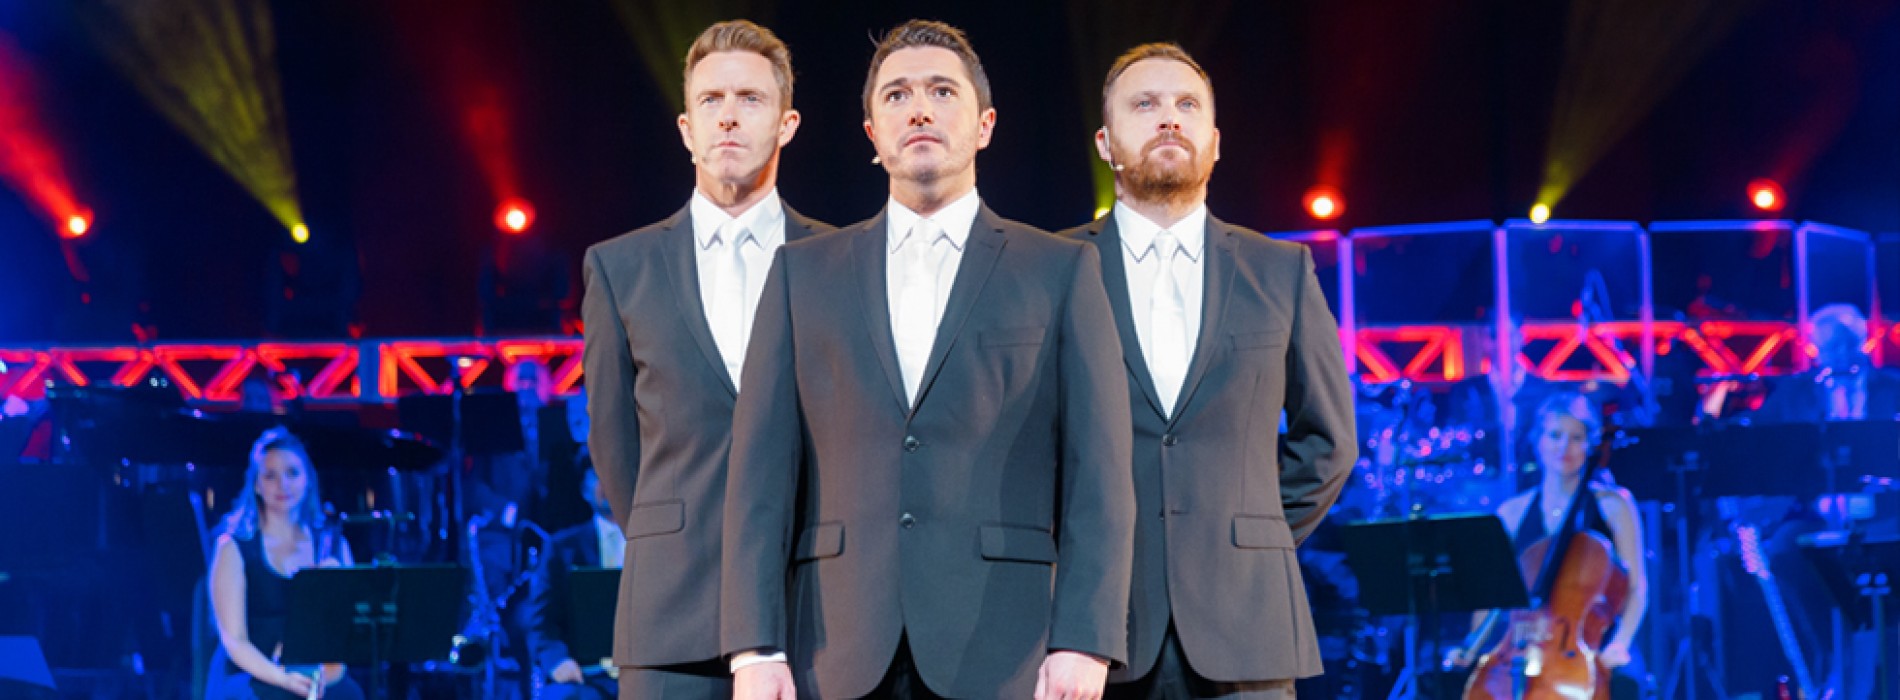 Three Phantoms to Bring the Best of Broadway and The West End to The Parisian Macao